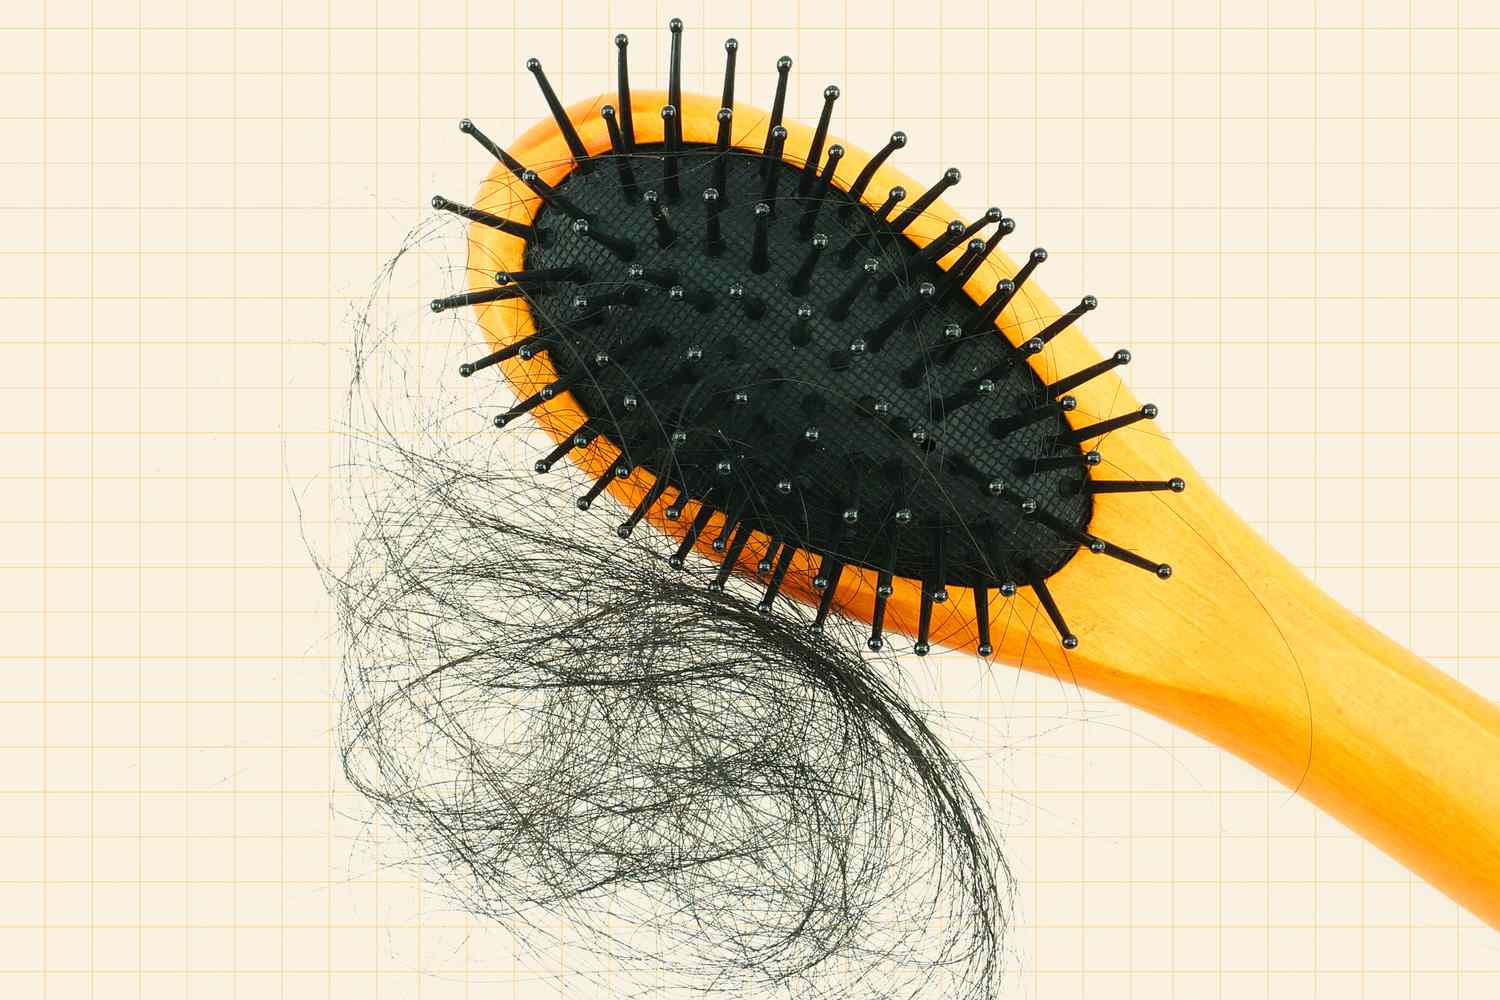 How to Prevent Hair Loss, According to Experts | EatingWell